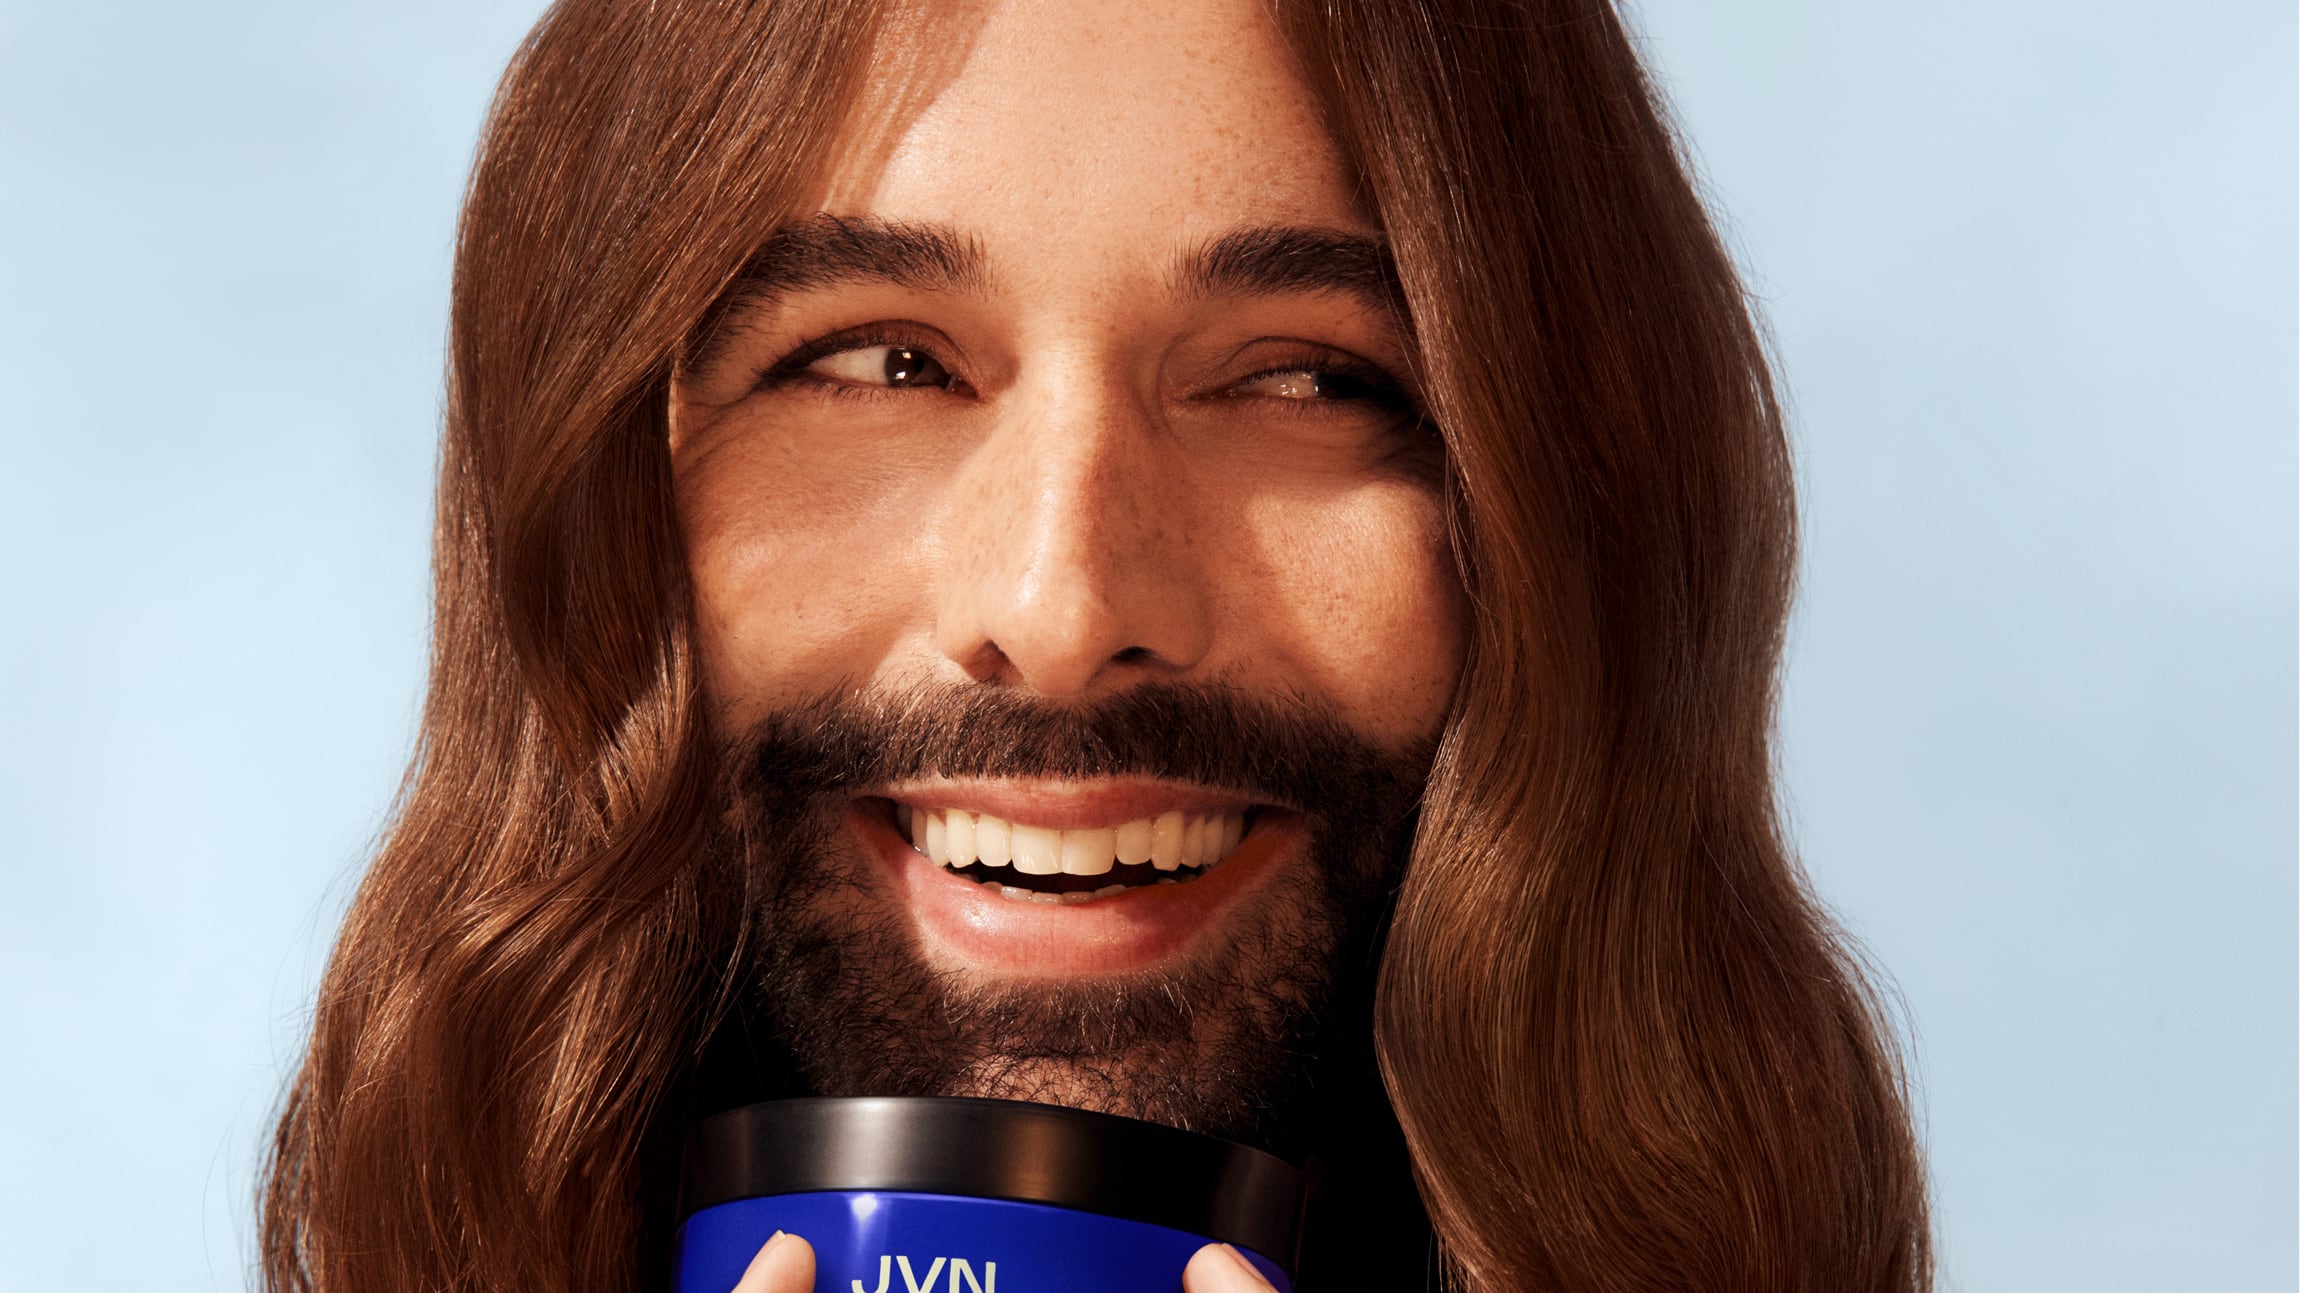 Jonathan Van Ness has opened up about embracing his own natural hair texture